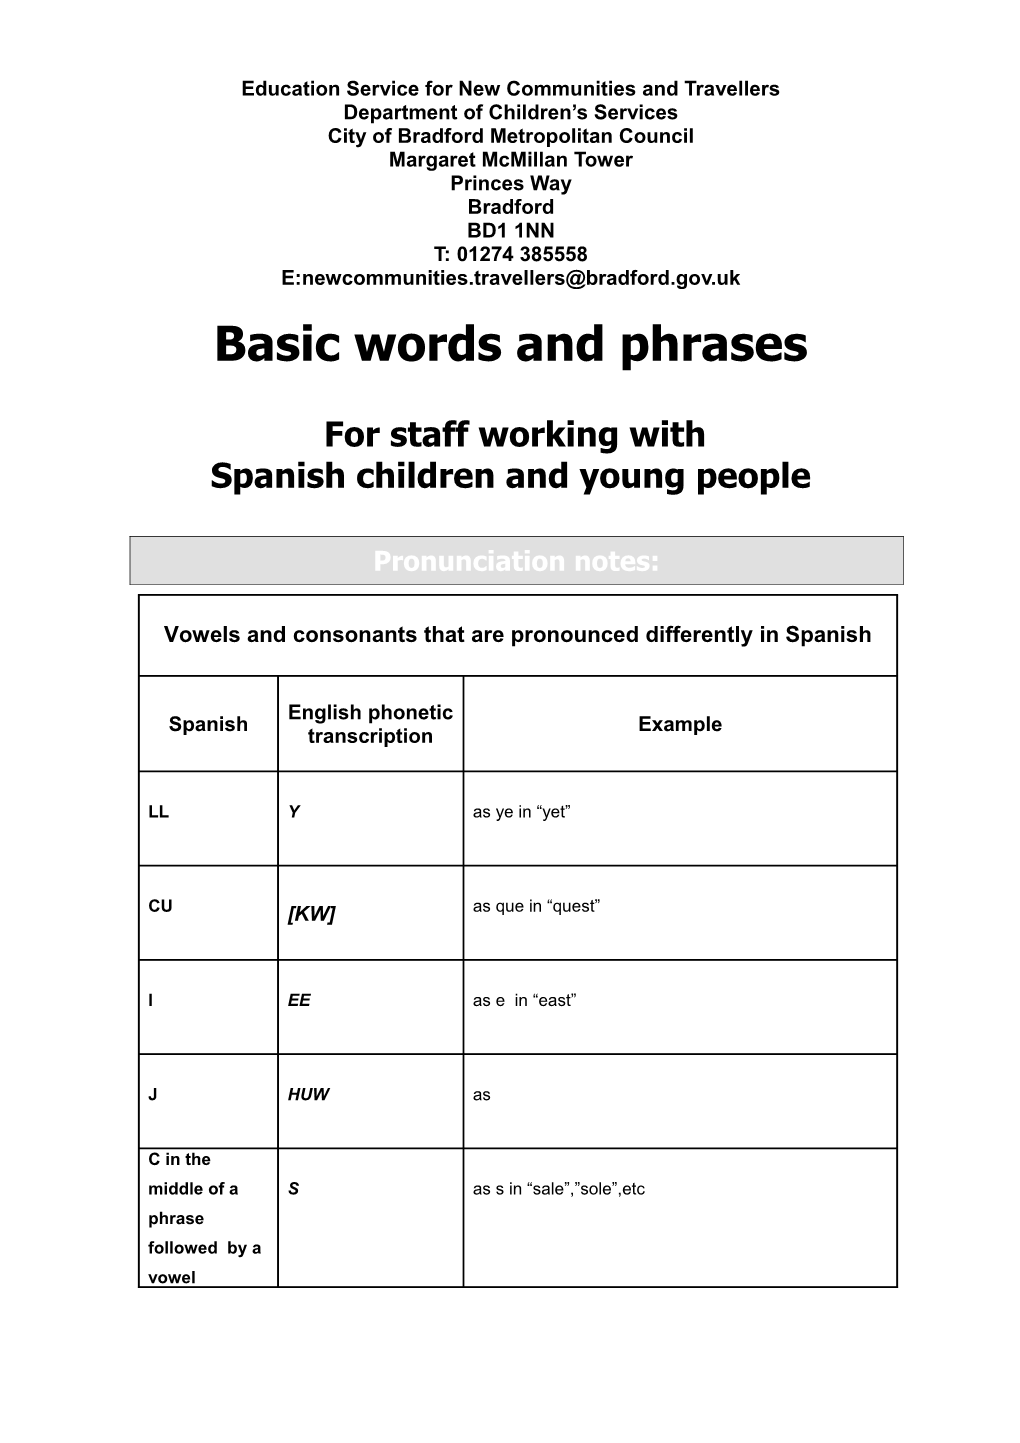 Basic Words and Phrases